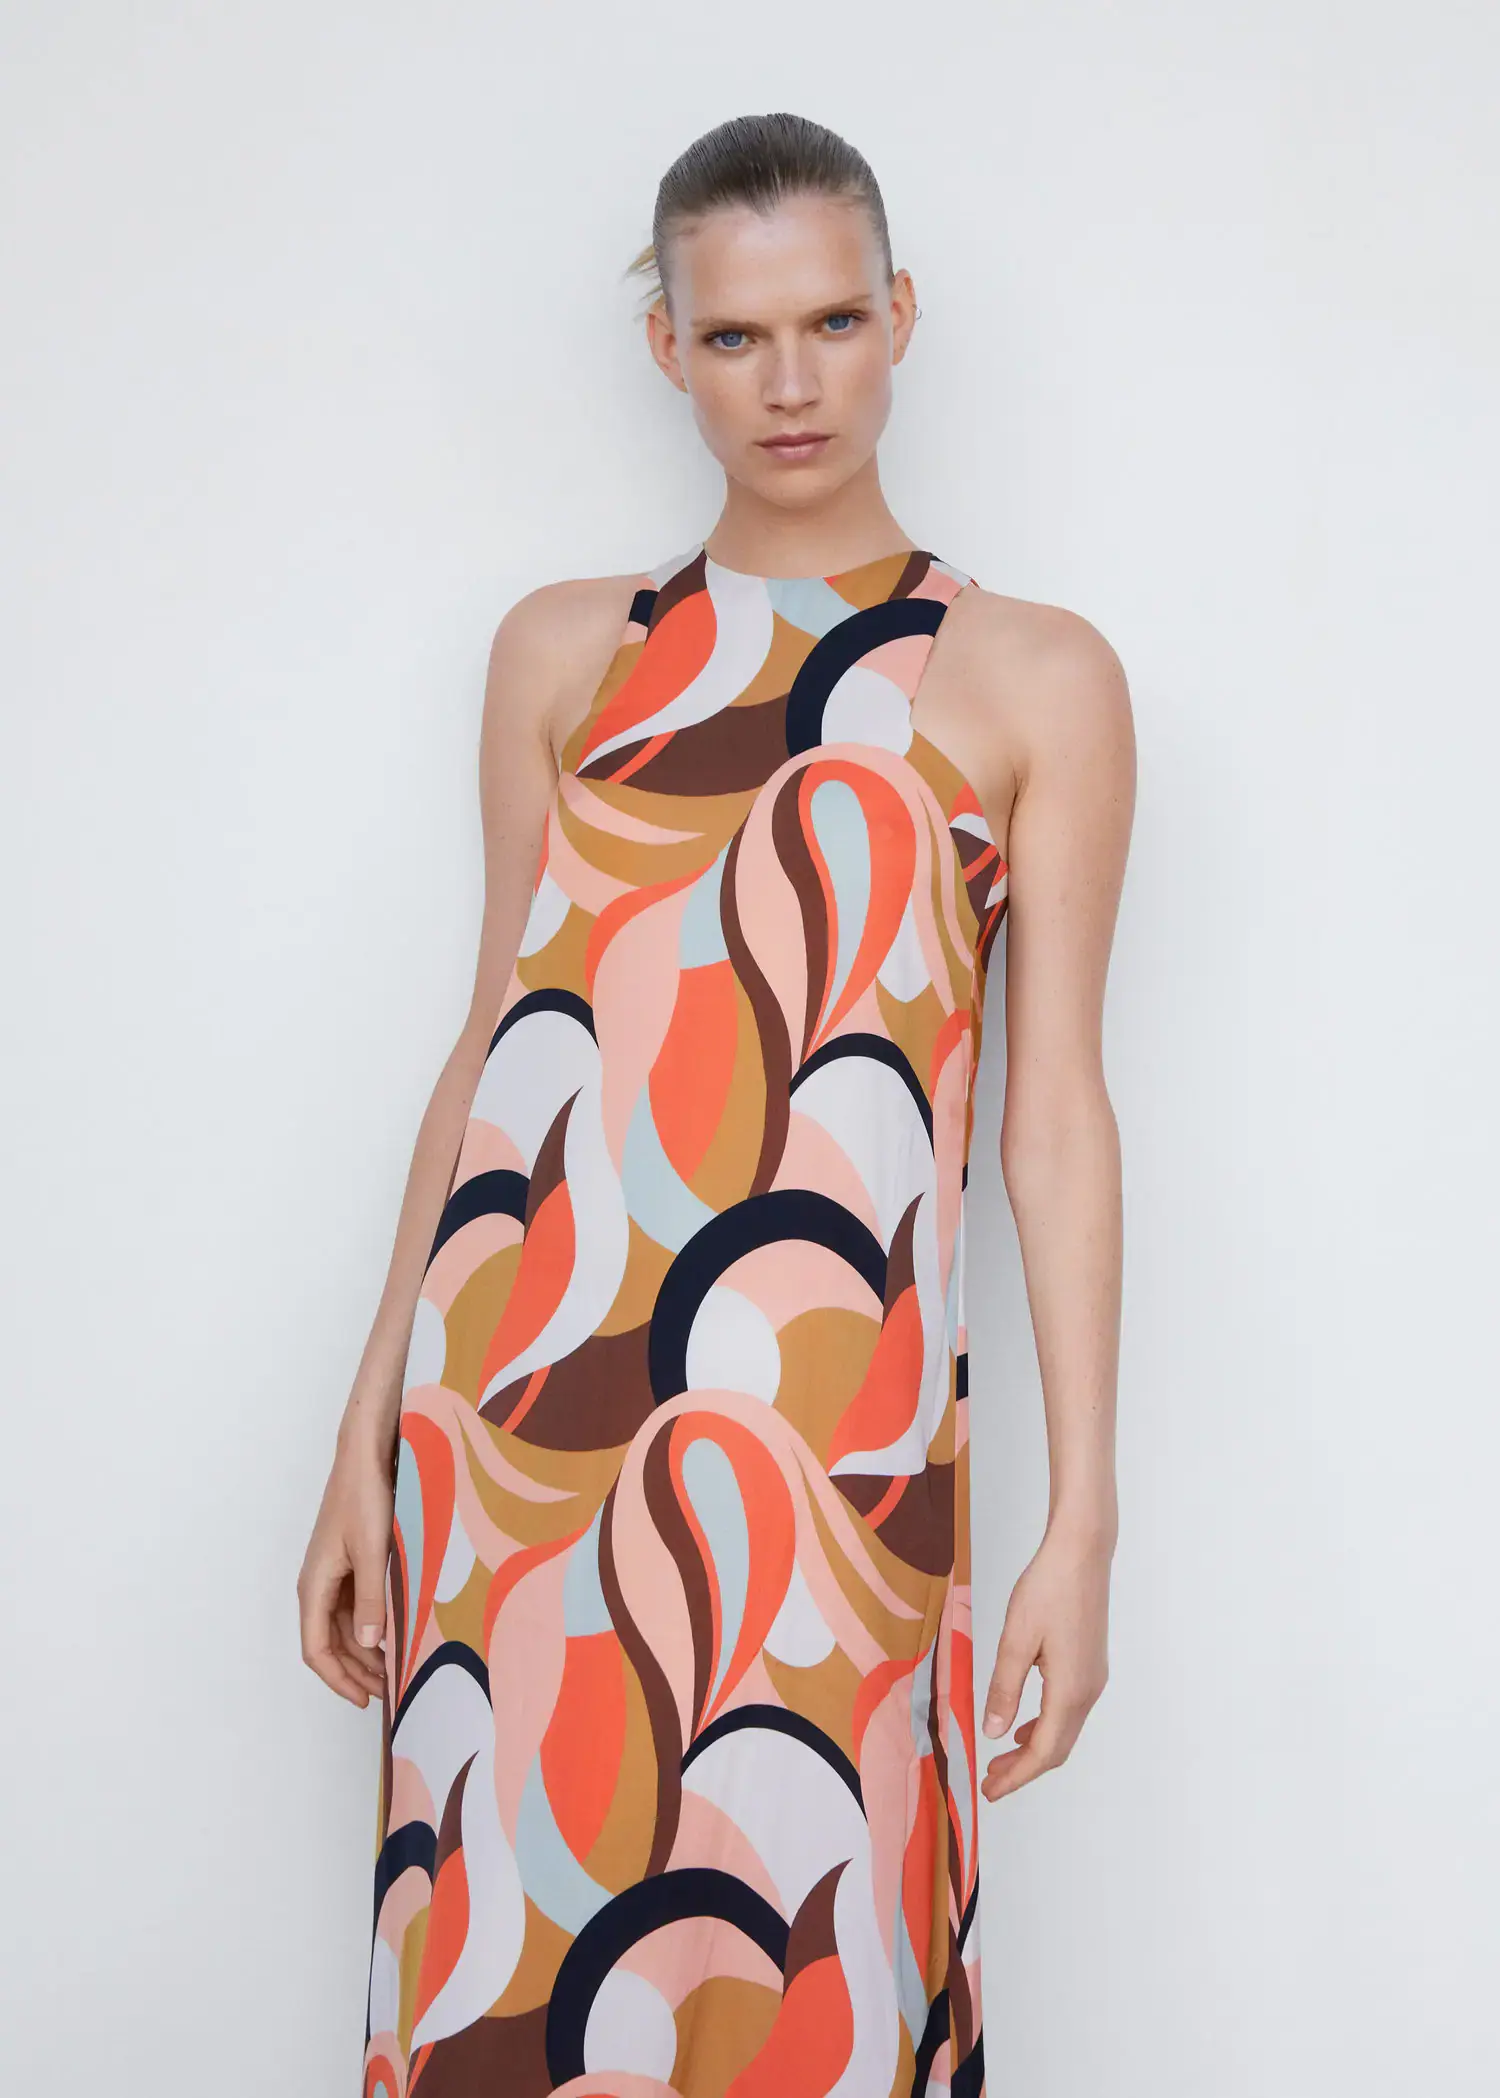 Mango Printed halter gown. a woman wearing a colorful dress posing for a picture. 